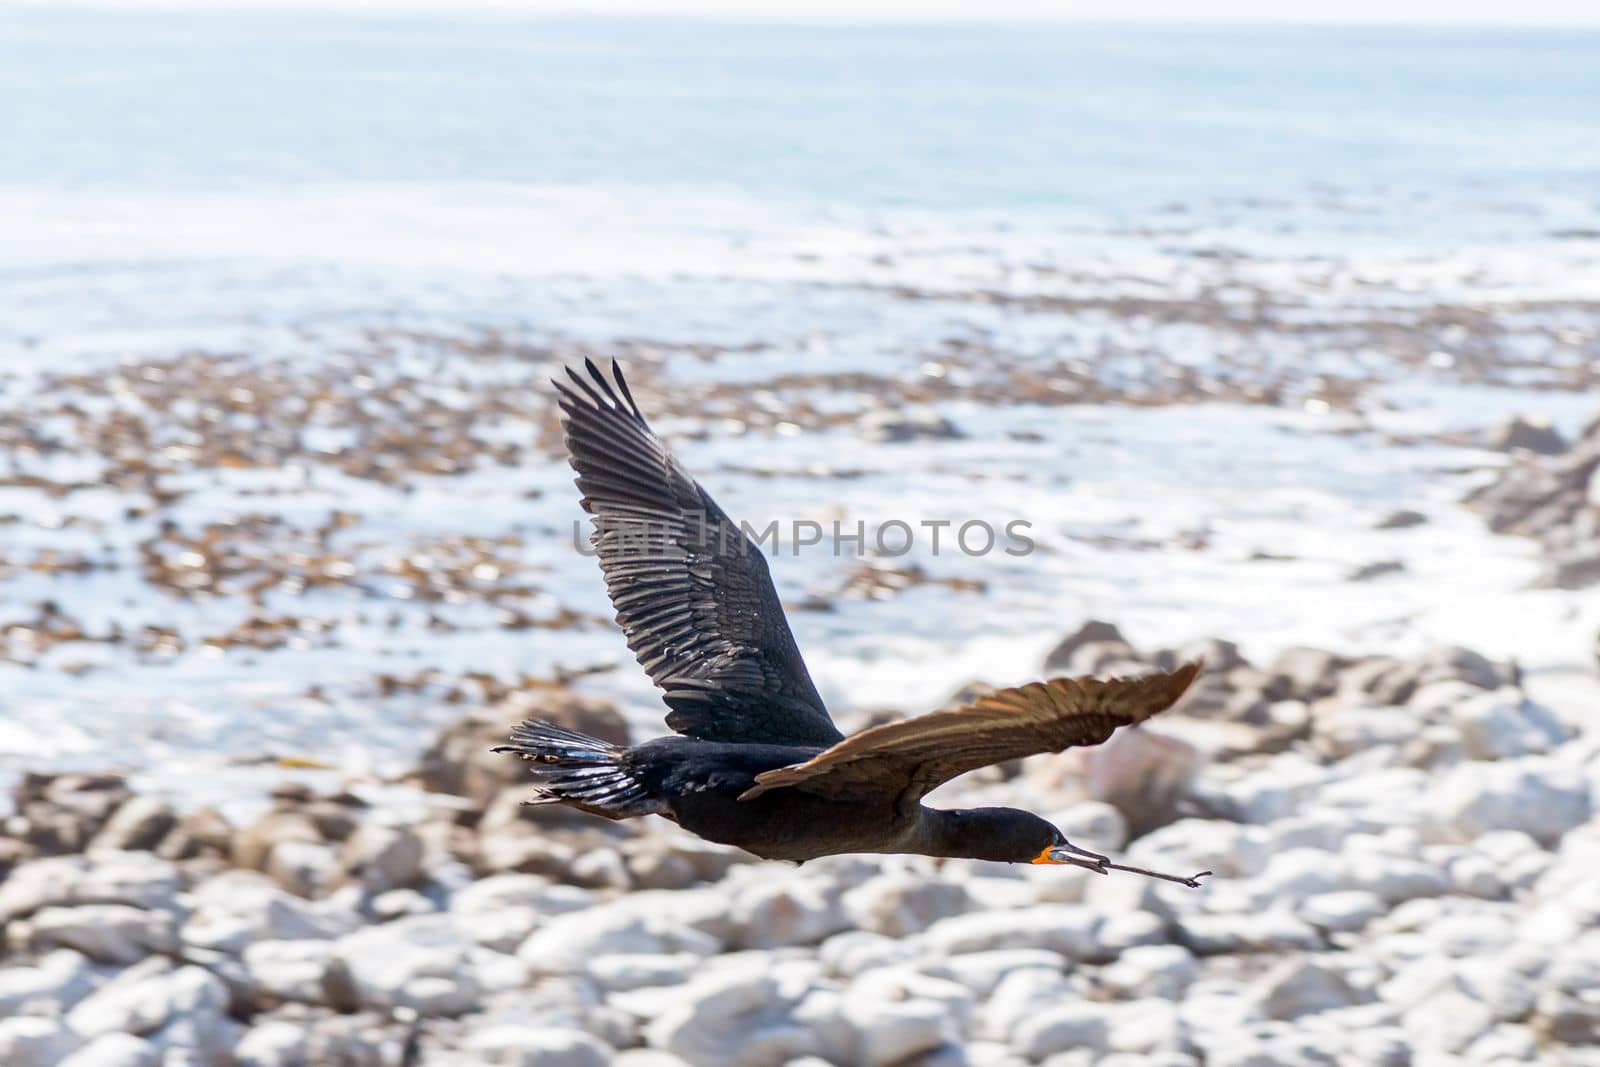 A Cape Cormorant, Phalacrocorax capensis, flying with nesting material in its beak at Stony Point Nature Reserve in Bettys Bay.